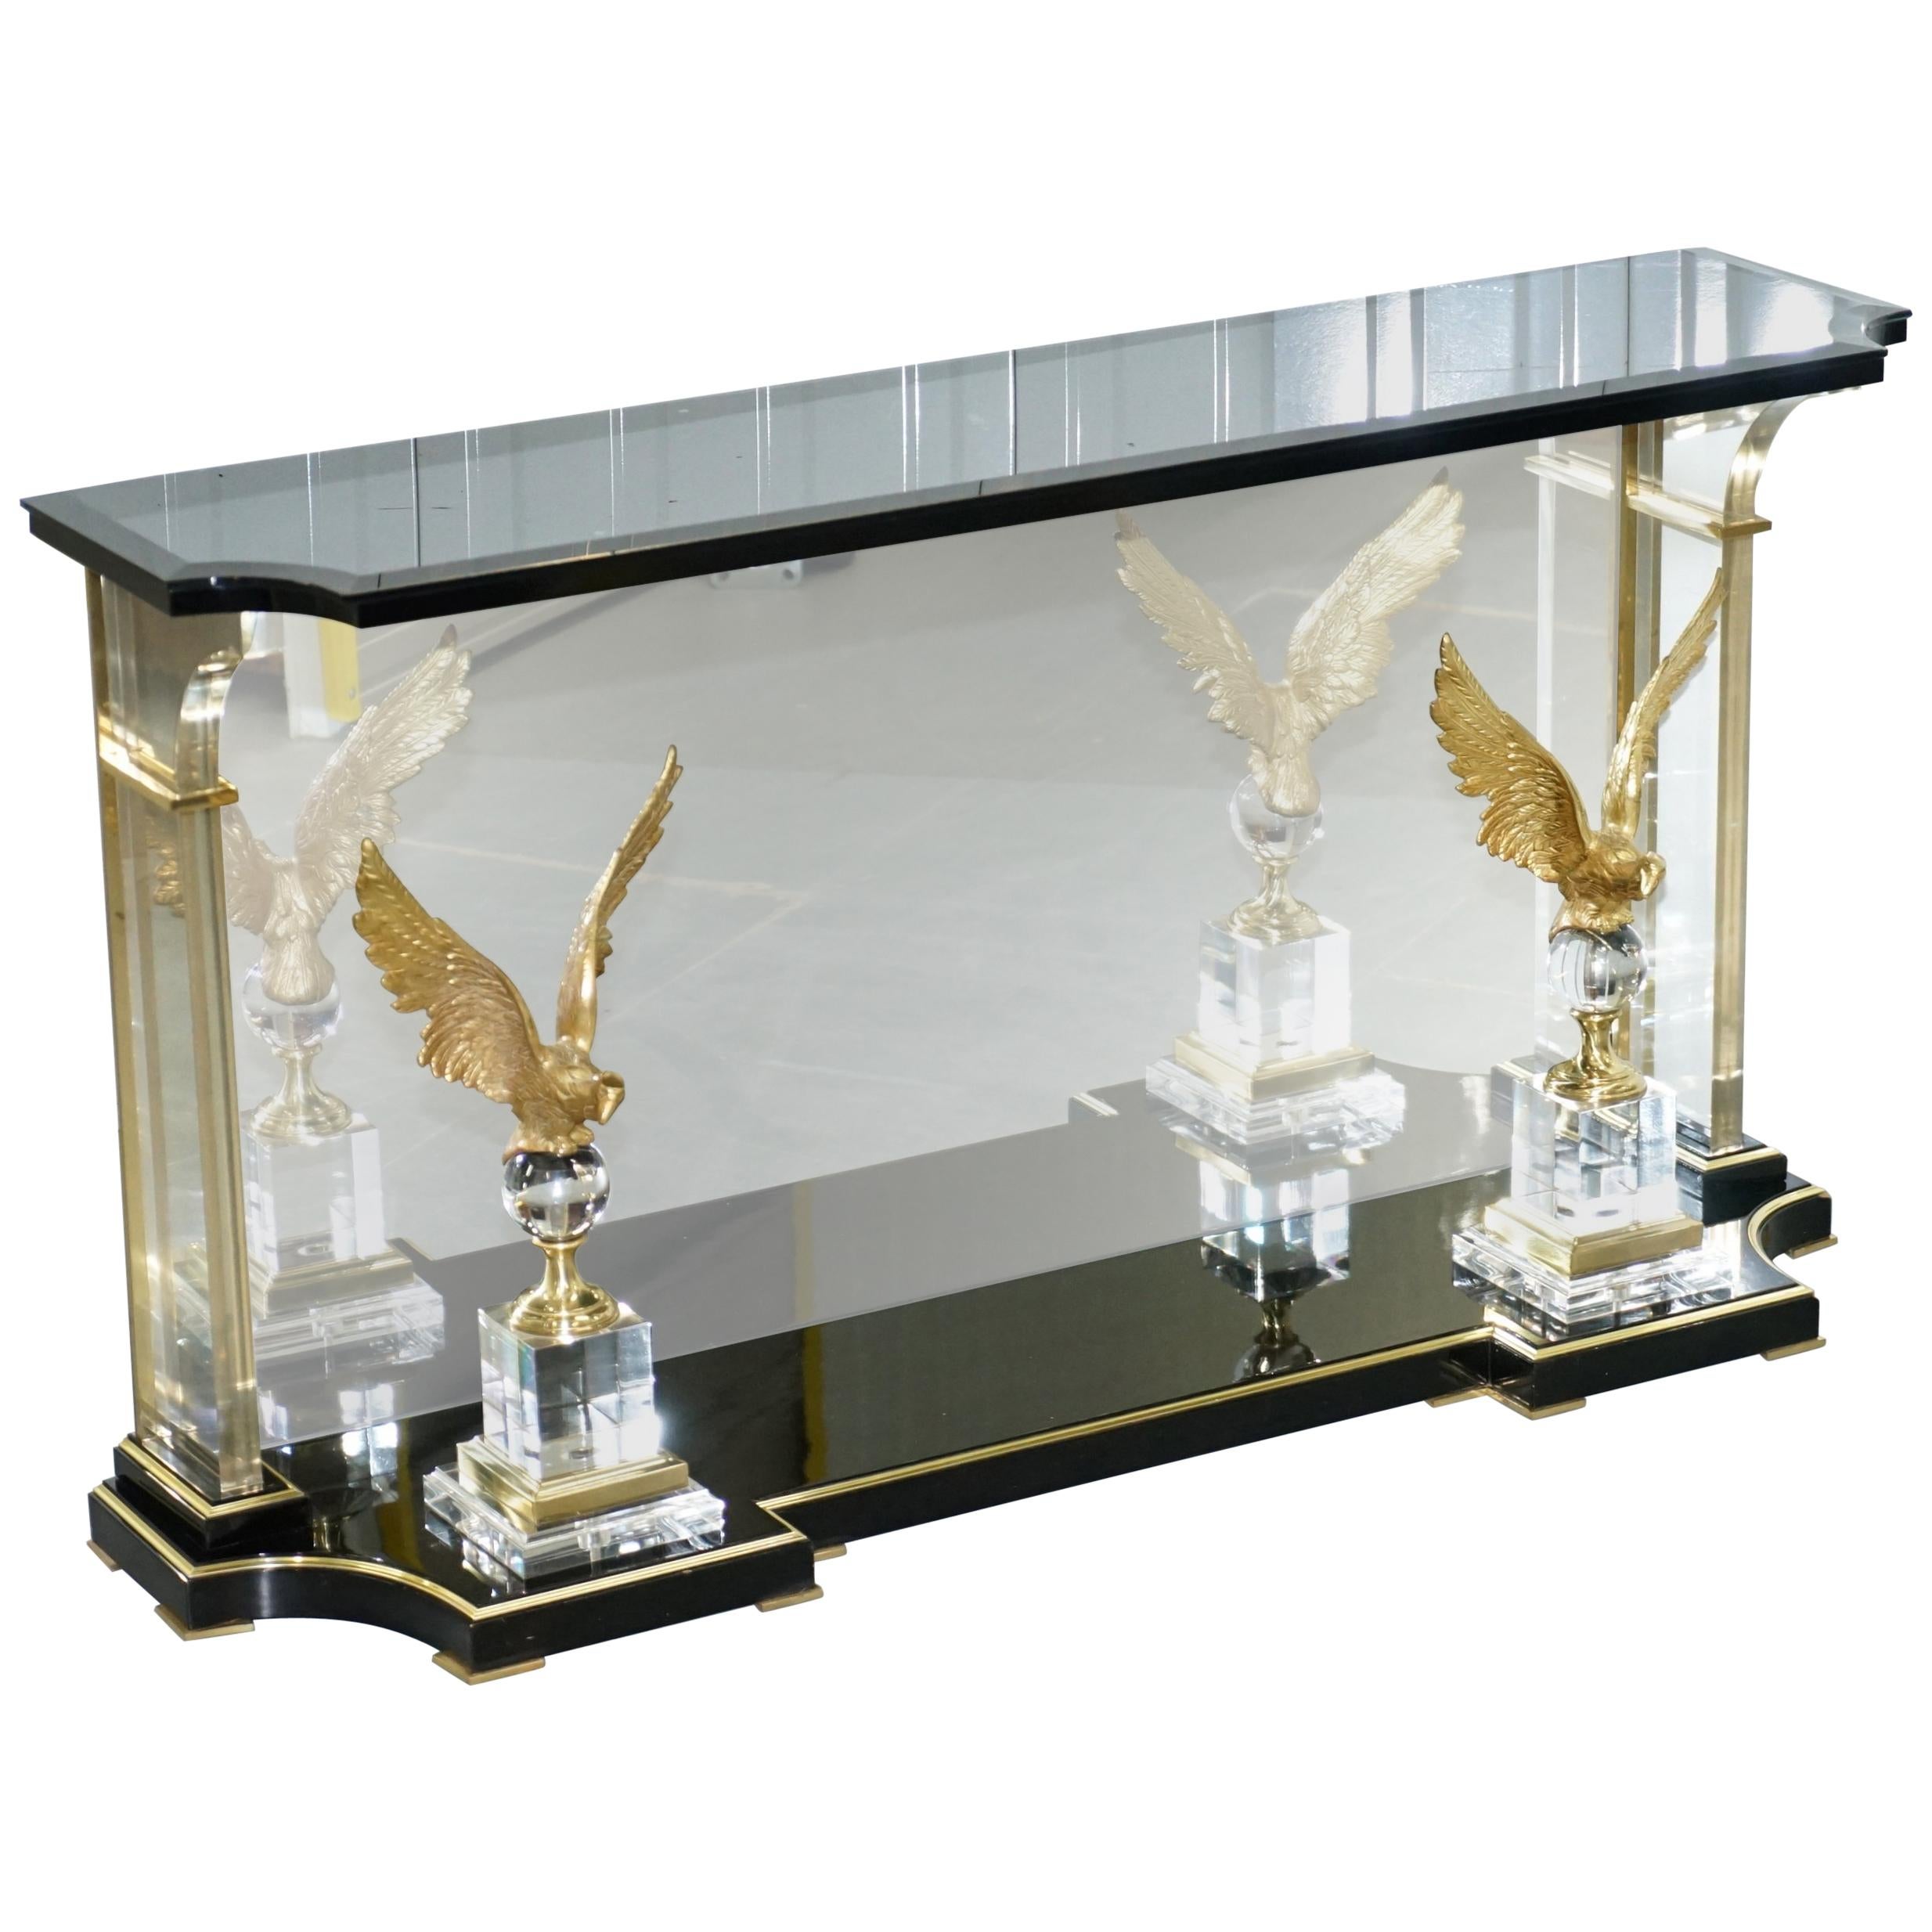 Lovely Rare Vintage Lucite Console Table with Bronzed Eagles Highly Decorative